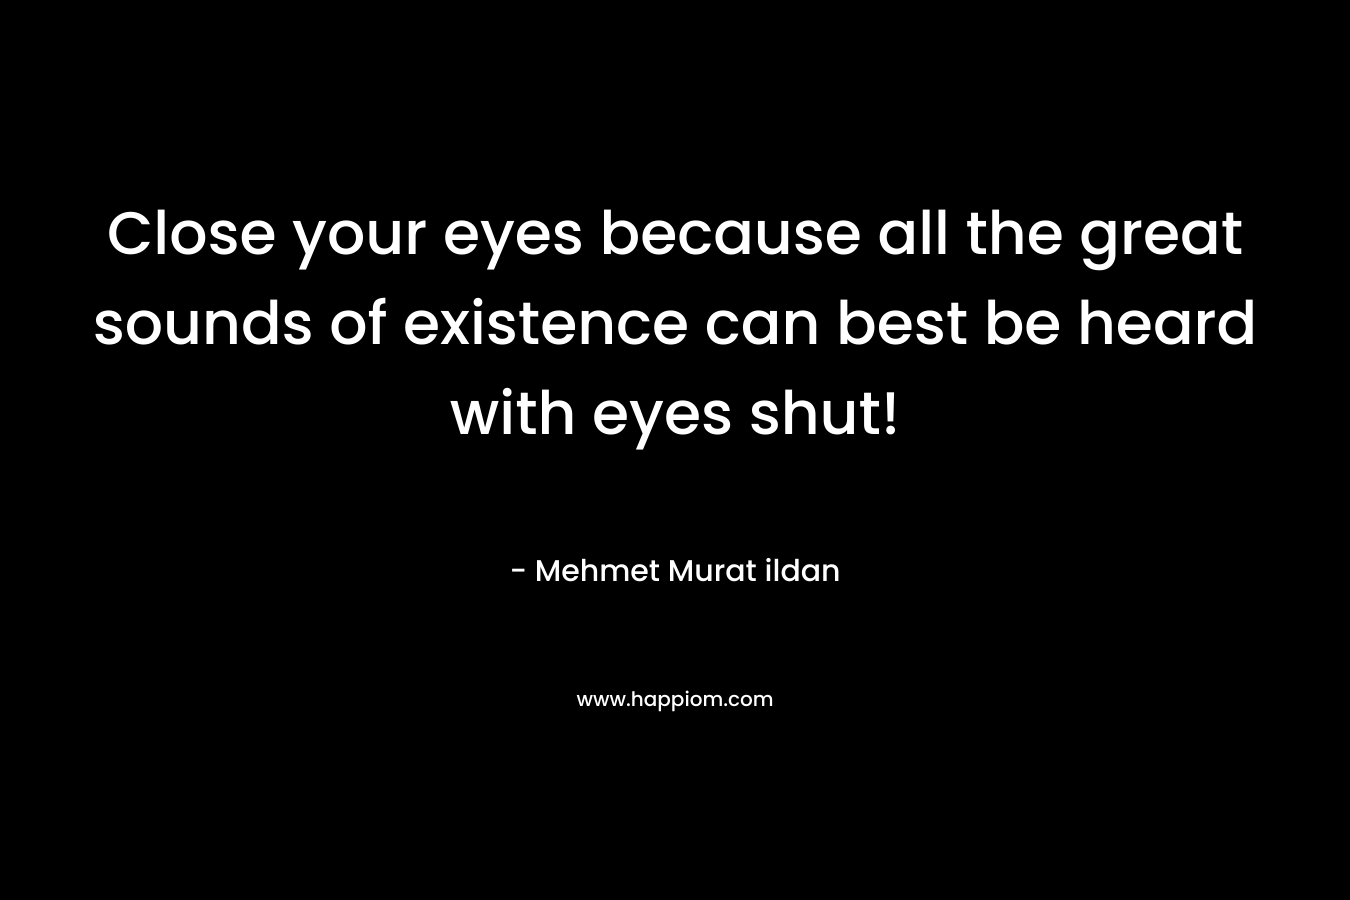 Close your eyes because all the great sounds of existence can best be heard with eyes shut!